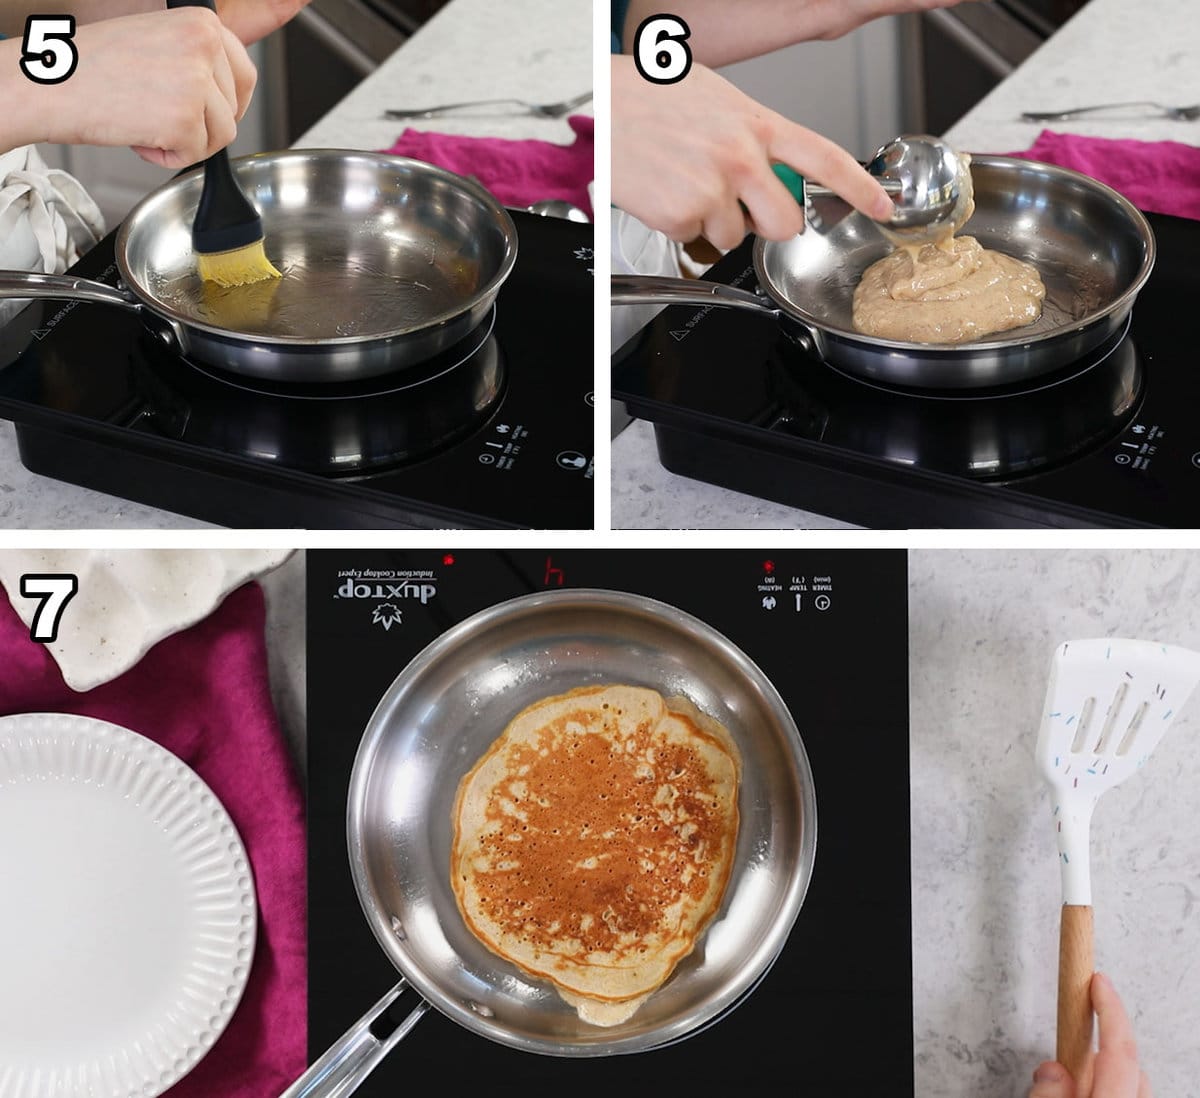 Collage of three photos showing banana pancake batter being cooked in a pan.